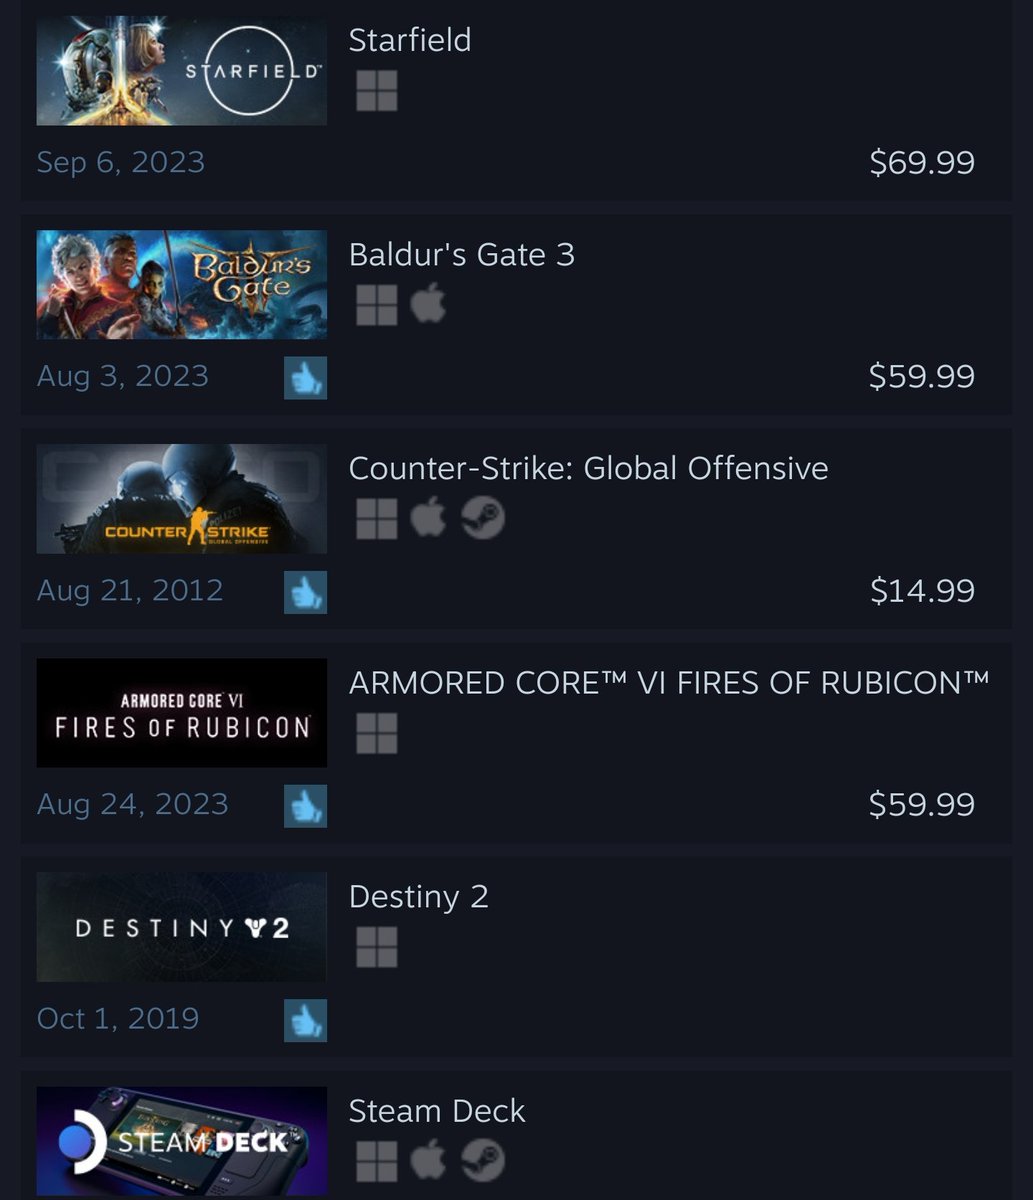 #Starfield is the #1 TOP SELLER on STEAM! 🔥 EVERYONE is excited for this BANGER of a game! 🔥 Its been top 5 ever since the StarfieldDirect! 🔥💚